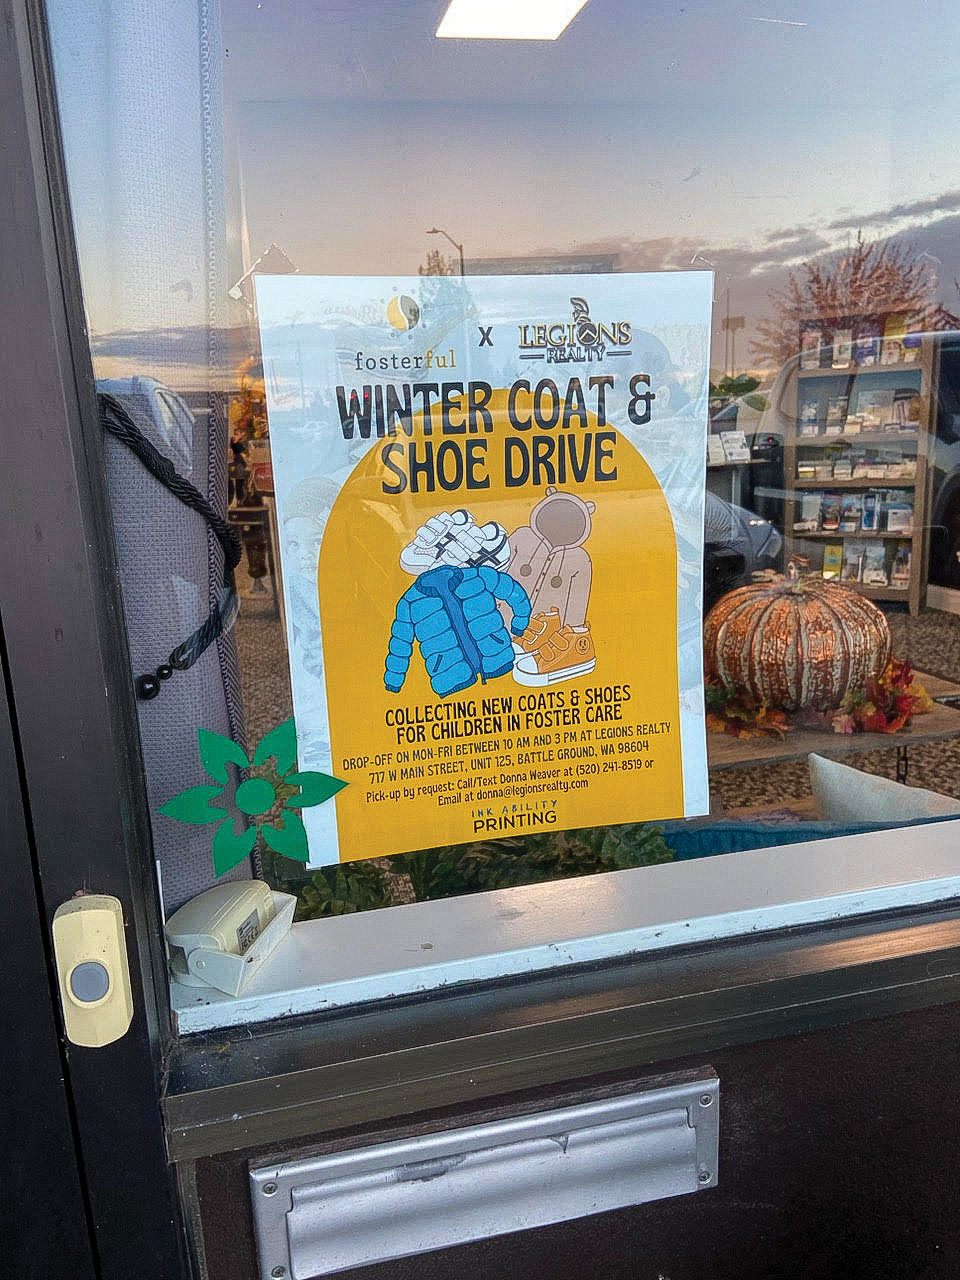 A poster for the winter coat and shoe drive hosted by Fosterful and Legions Realty is displayed in a window.